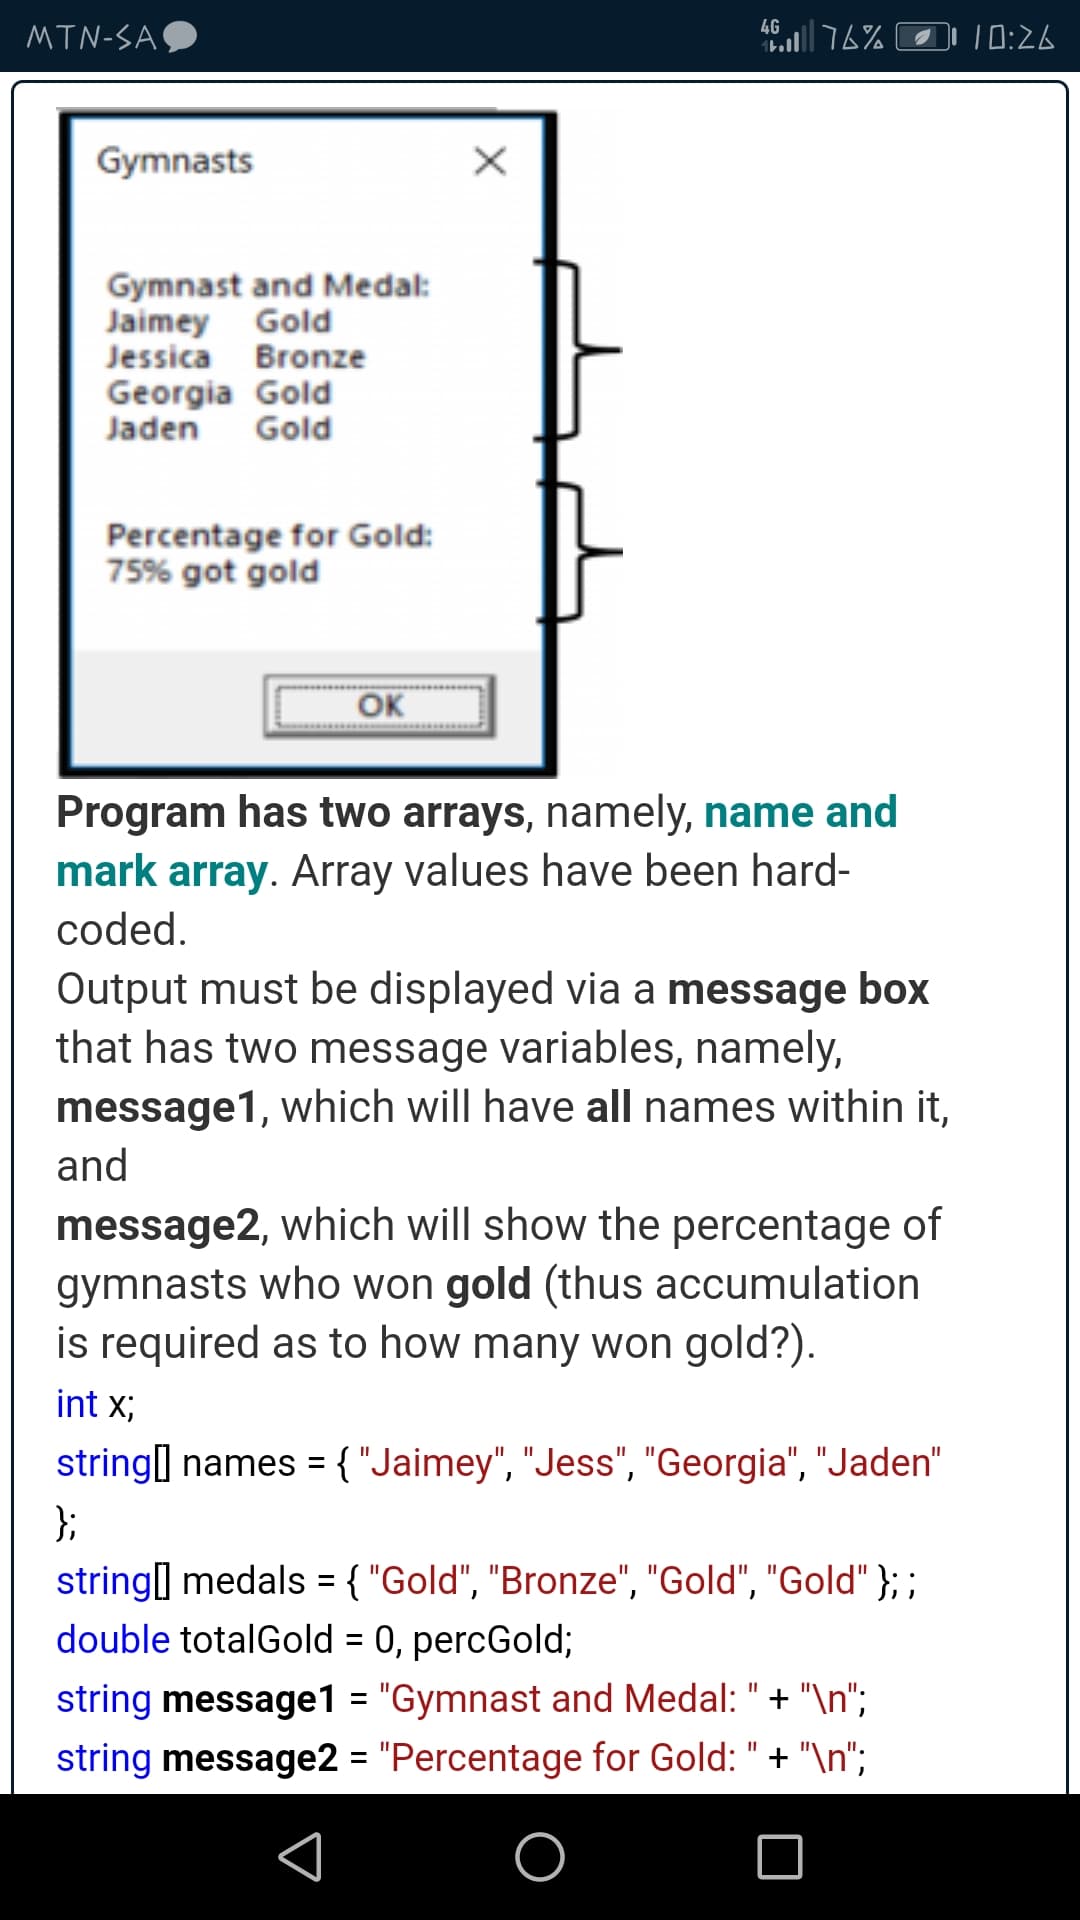 4G
MTN-SAO
10:26
Gymnasts
Gymnast and Medal:
Jaimey Gold
Jessica Bronze
Georgia Gold
Jaden Gold
Percentage for Gold:
75% got gold
OK
Program has two arrays, namely, name and
mark array. Array values have been hard-
coded.
Output must be displayed via a message box
that has two message variables, namely,
message1, which will have all names within it,
and
message2, which will show the percentage of
gymnasts who won gold (thus accumulation
is required as to how many won gold?).
int X;
string] names ={"Jaimey", "Jess", "Georgia", "Jaden"
%D
};
string medals = { "Gold", "Bronze", "Gold", "Gold" }; ;
double totalGold = 0, percGold;
%3D
%3D
string message1 = "Gymnast and Medal: " + "\n";
string message2 = "Percentage for Gold: " + "\n";
